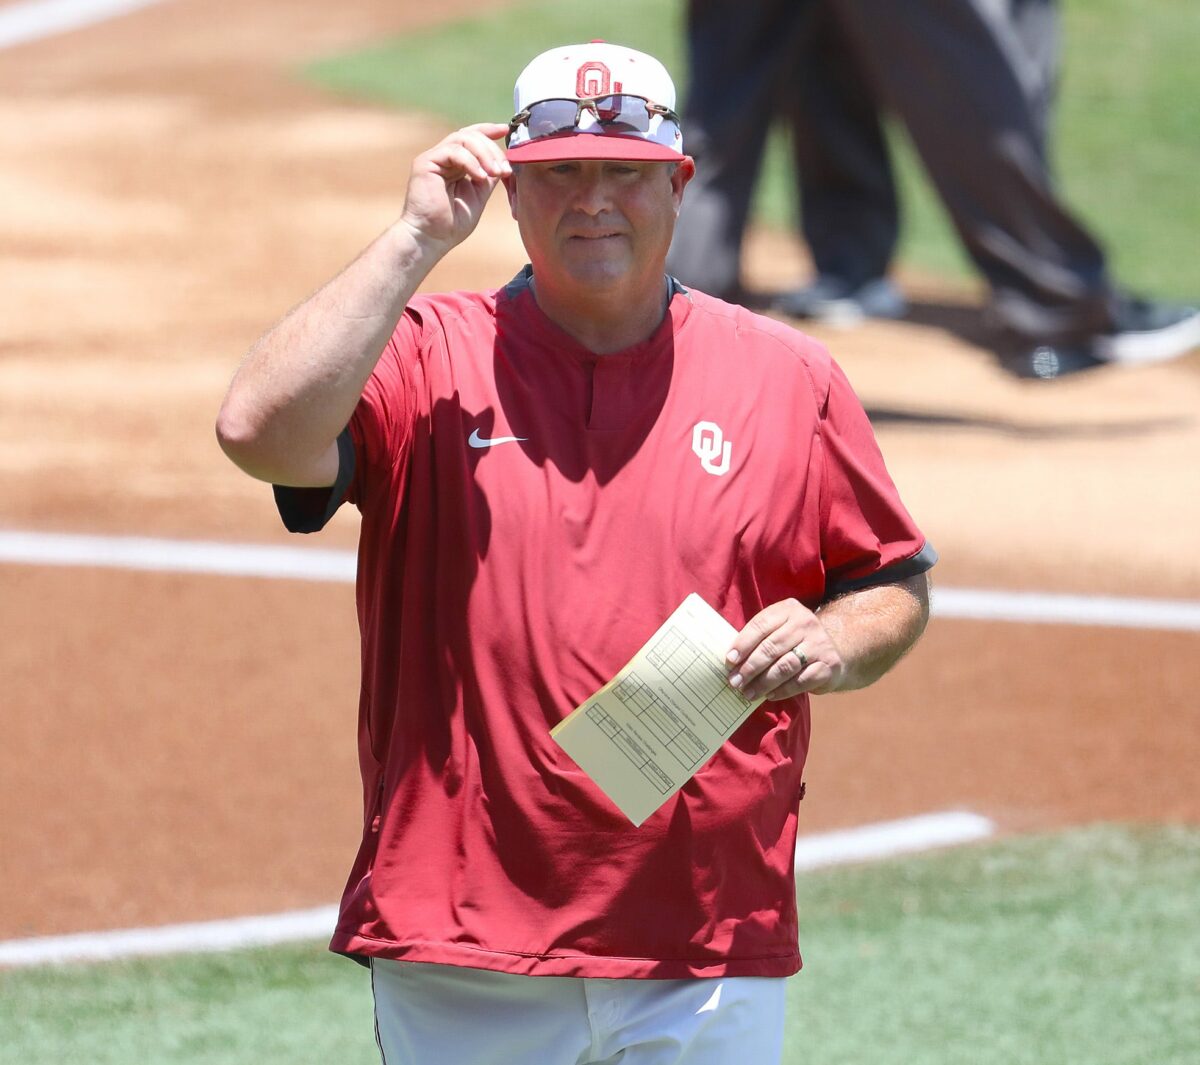 Oklahoma Sooners complete comeback to beat Kansas in walk-off fashion